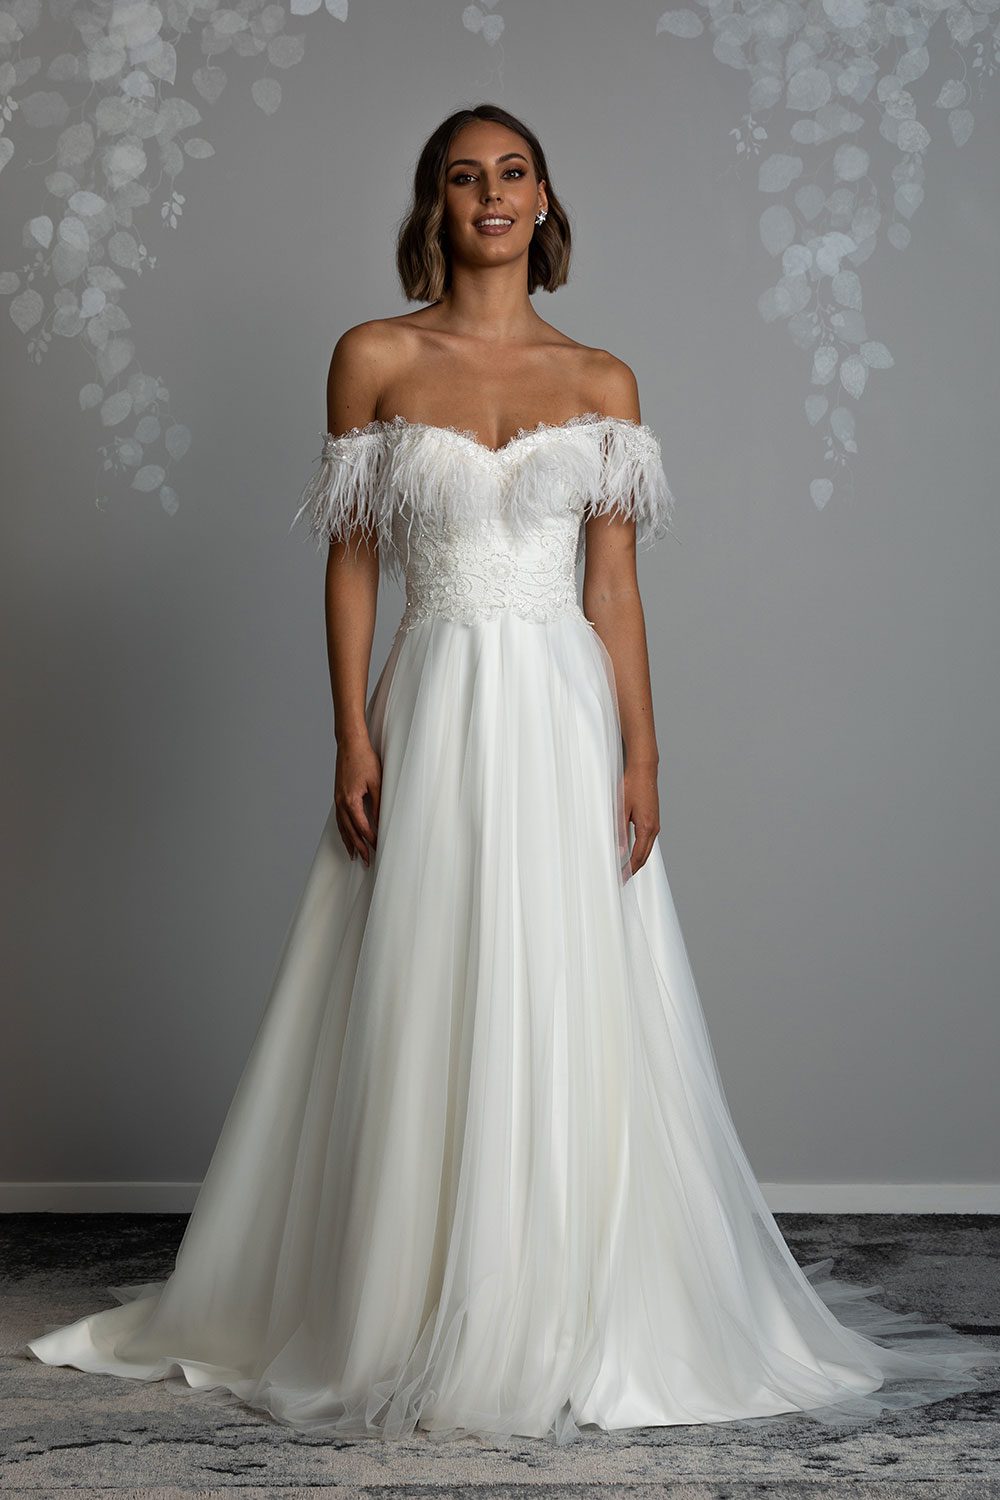 Heather wedding Dress by Vinka Design - Featuring a classic structured bodice hand-appliquéd with intricately beaded french lace accentuating the waist, which spills into a skirt crafted with full feather-light tulle. The off-shoulder bodice draws the eye to the wearer’s décolletage and is adorned opulently with ostrich feathers and appliquéd with iridescent beaded detailing. Front view of model wearing dreamy feathered structured bodice gown with skirt made of layers of tulle